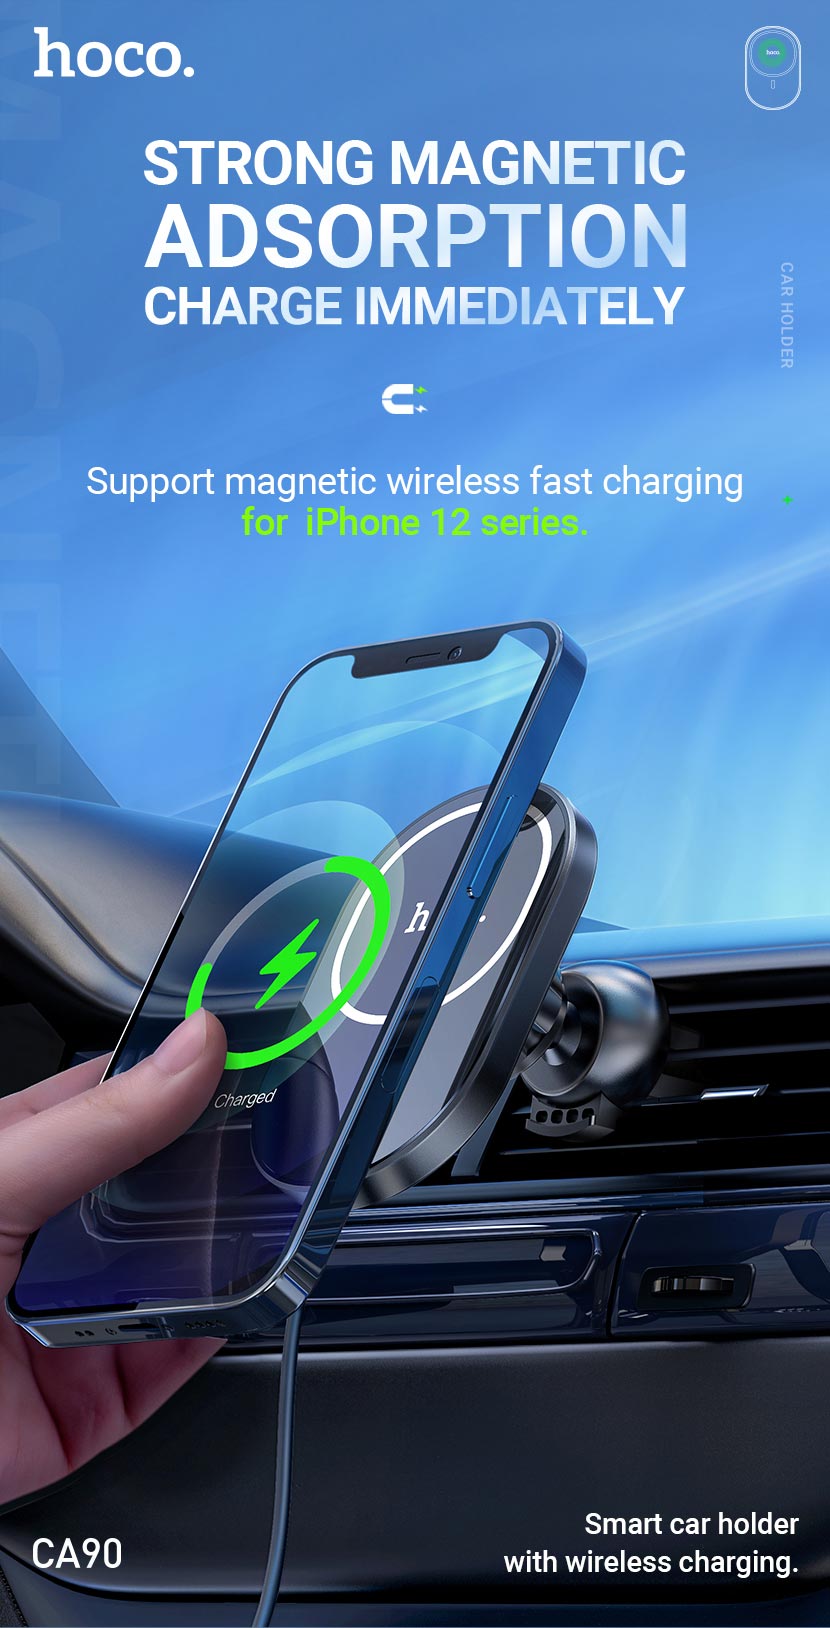 hoco news ca90 powerful magnetic car holder with wireless charging en